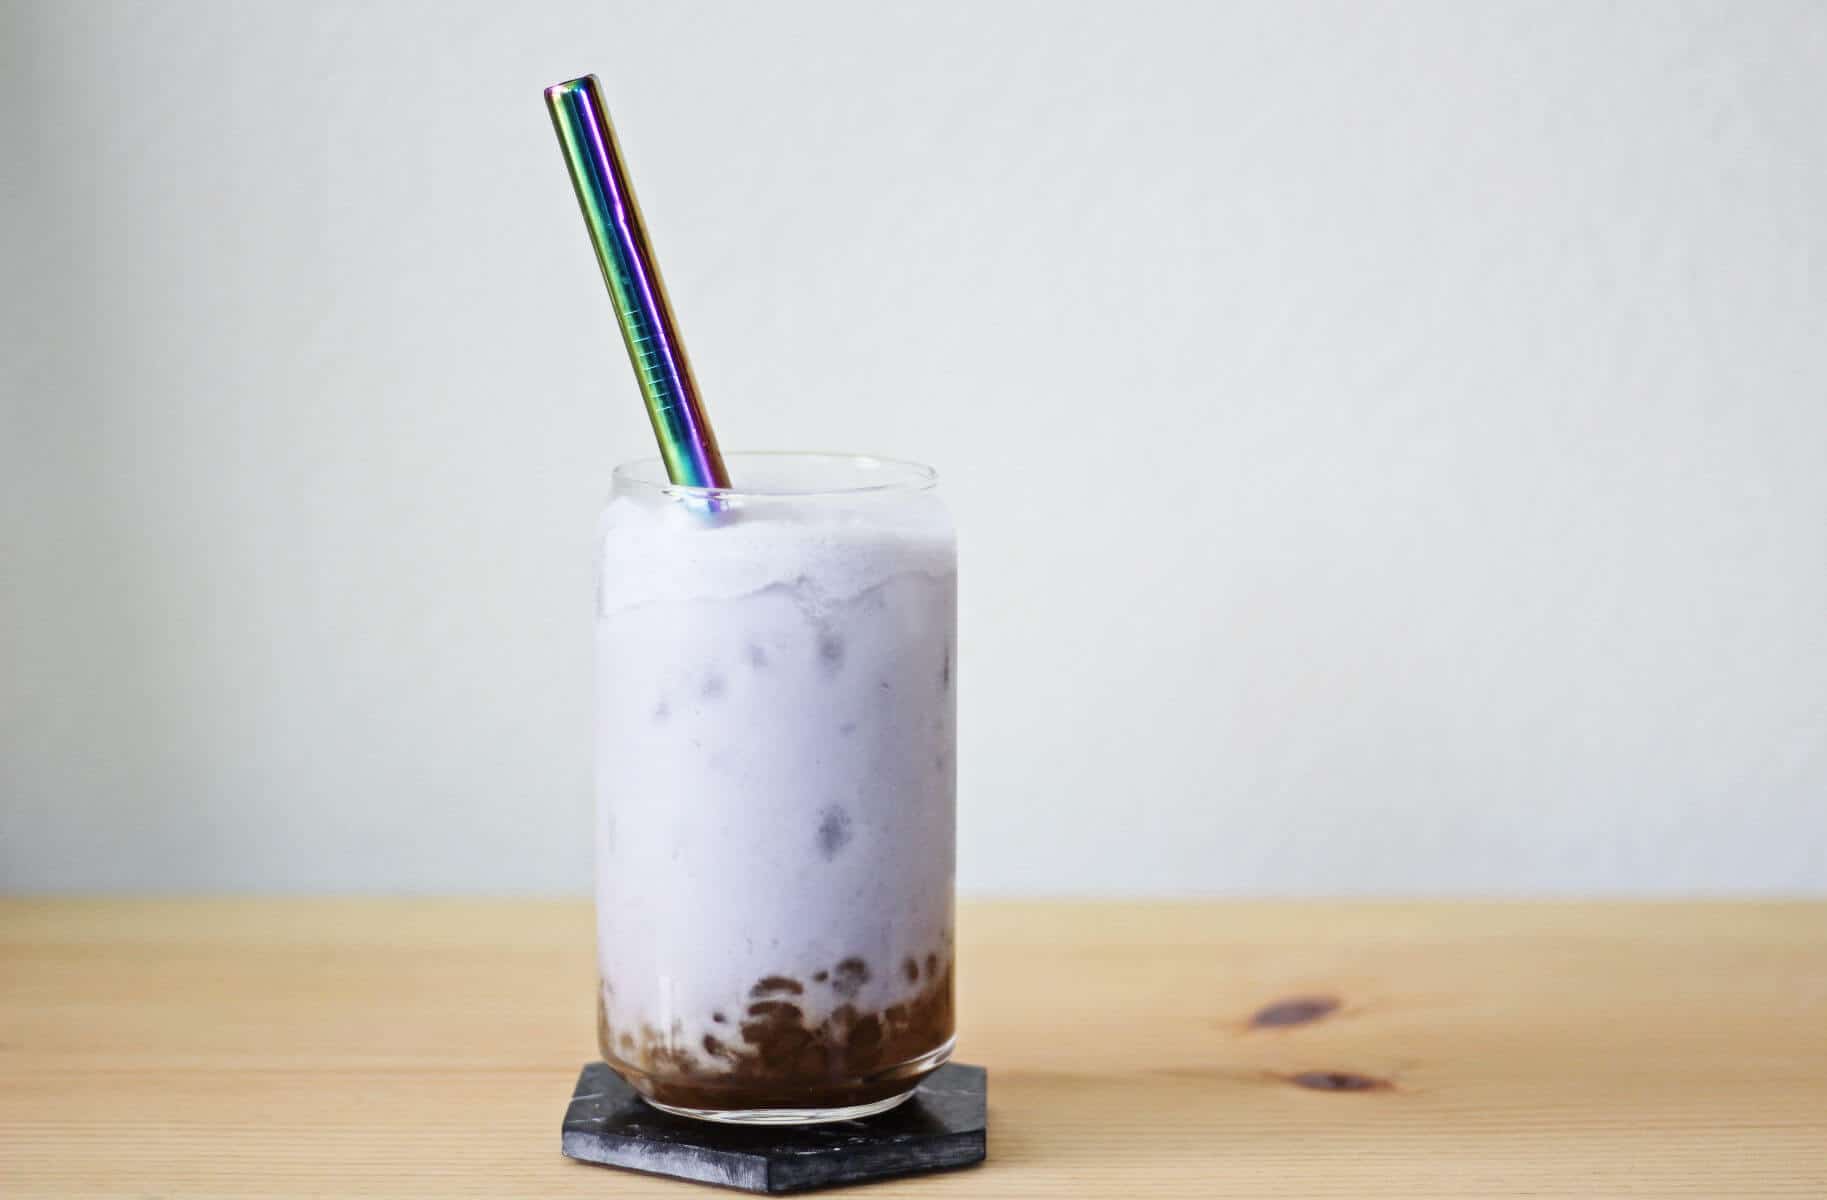 Clear glass filled with brown sugar boba, lilac milk tea, ice and a metal straw.